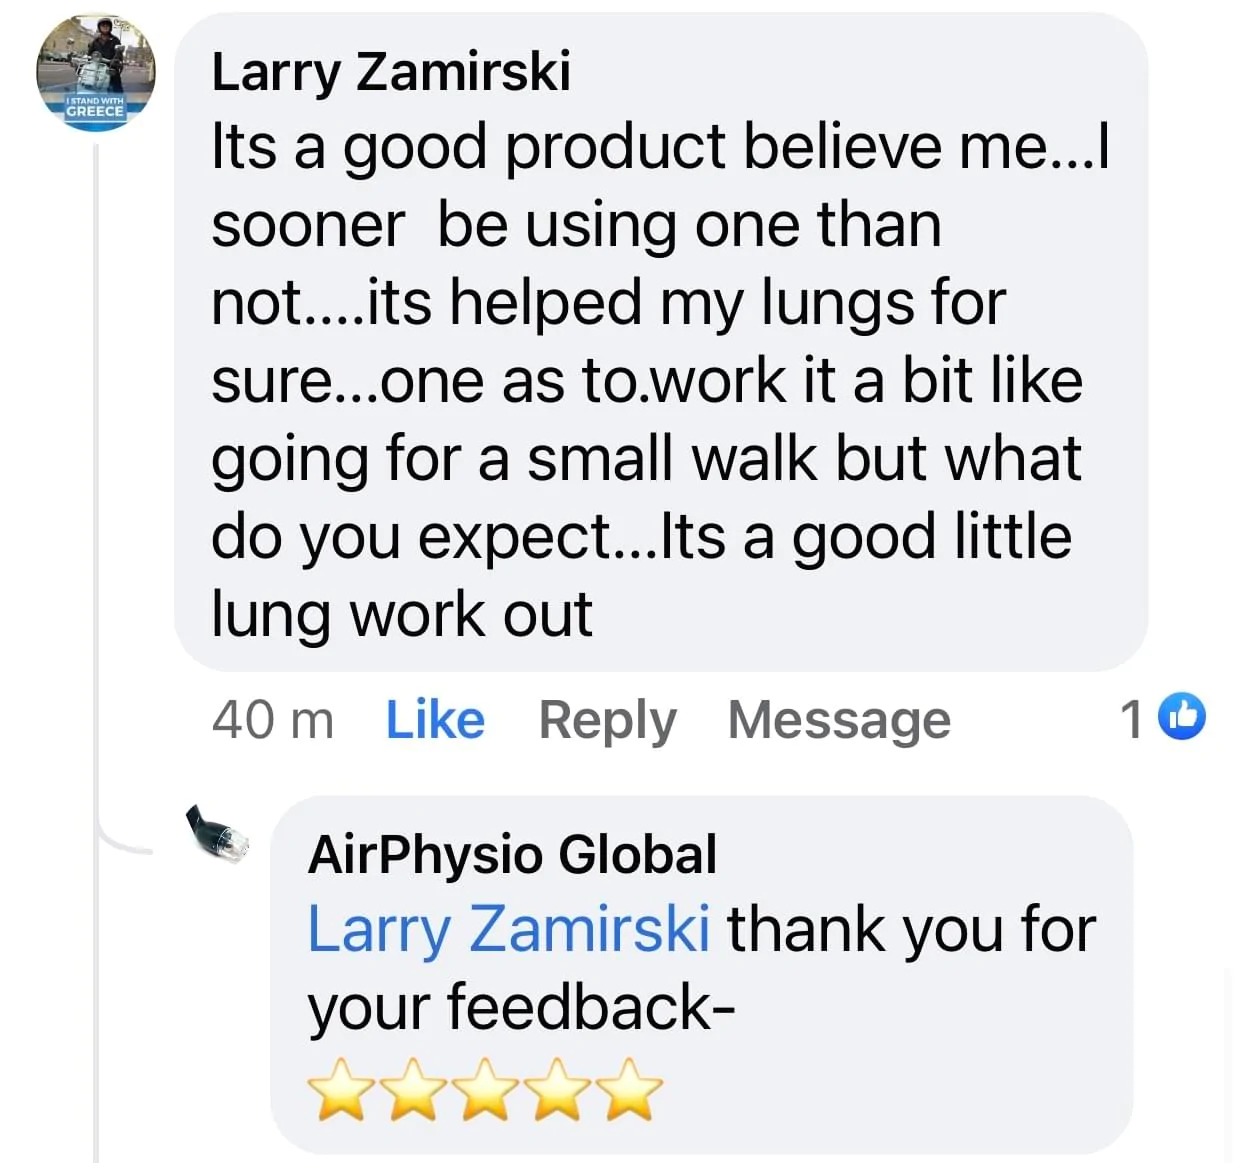 Larry-Zamirski-its-a-good-product-beleive-me